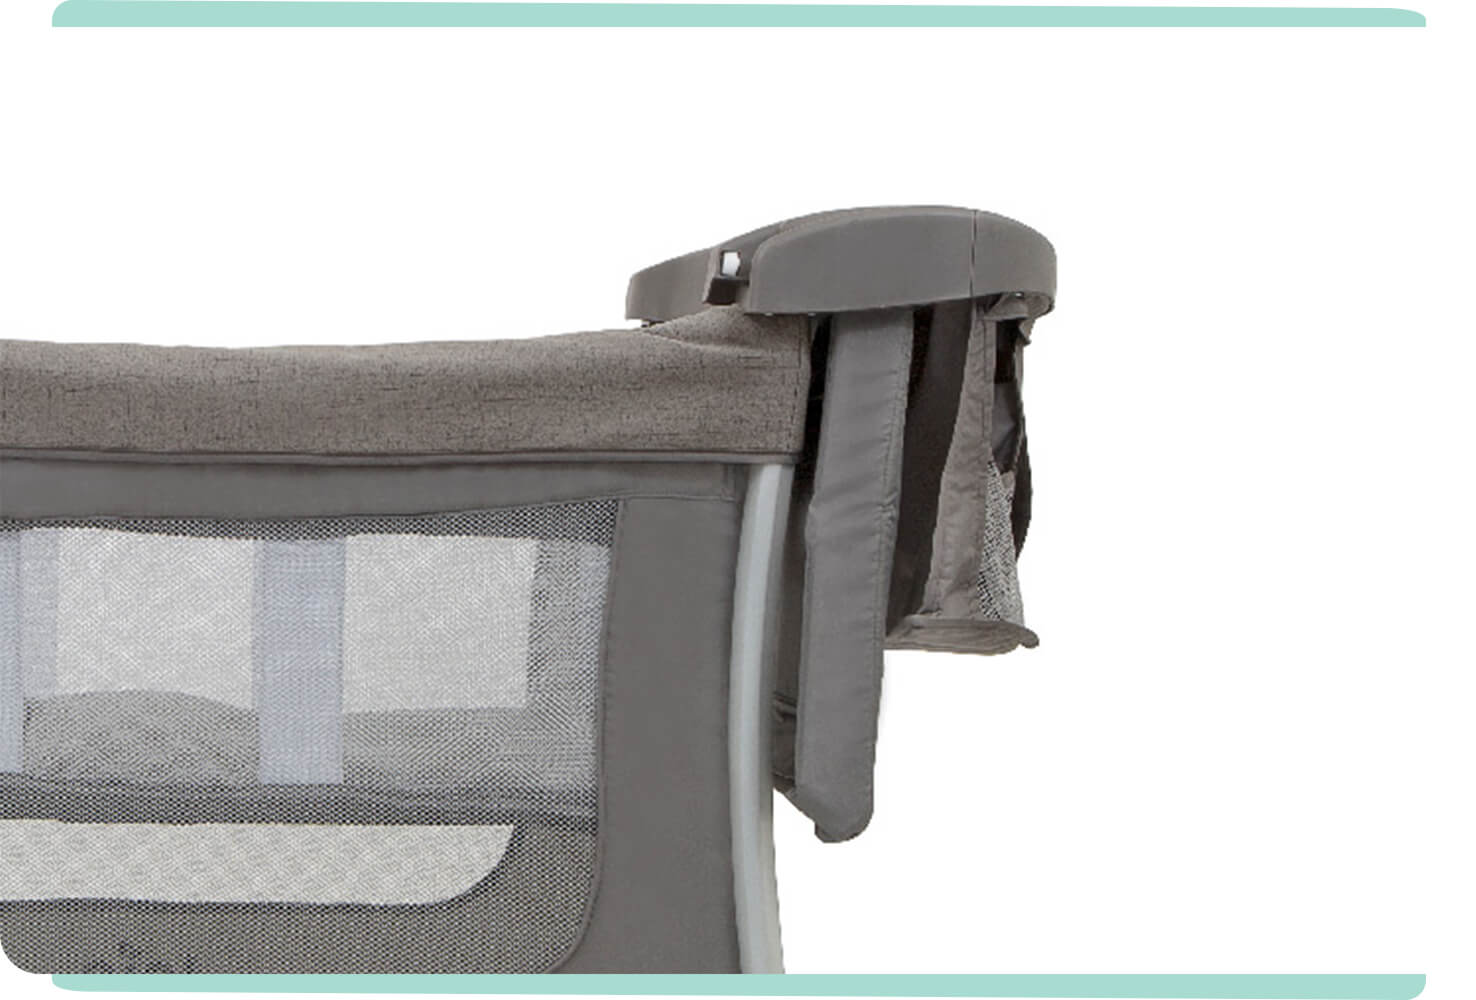 A close up view of the changing table storage on the side of the Joie travel cot illusion in dark gray. 